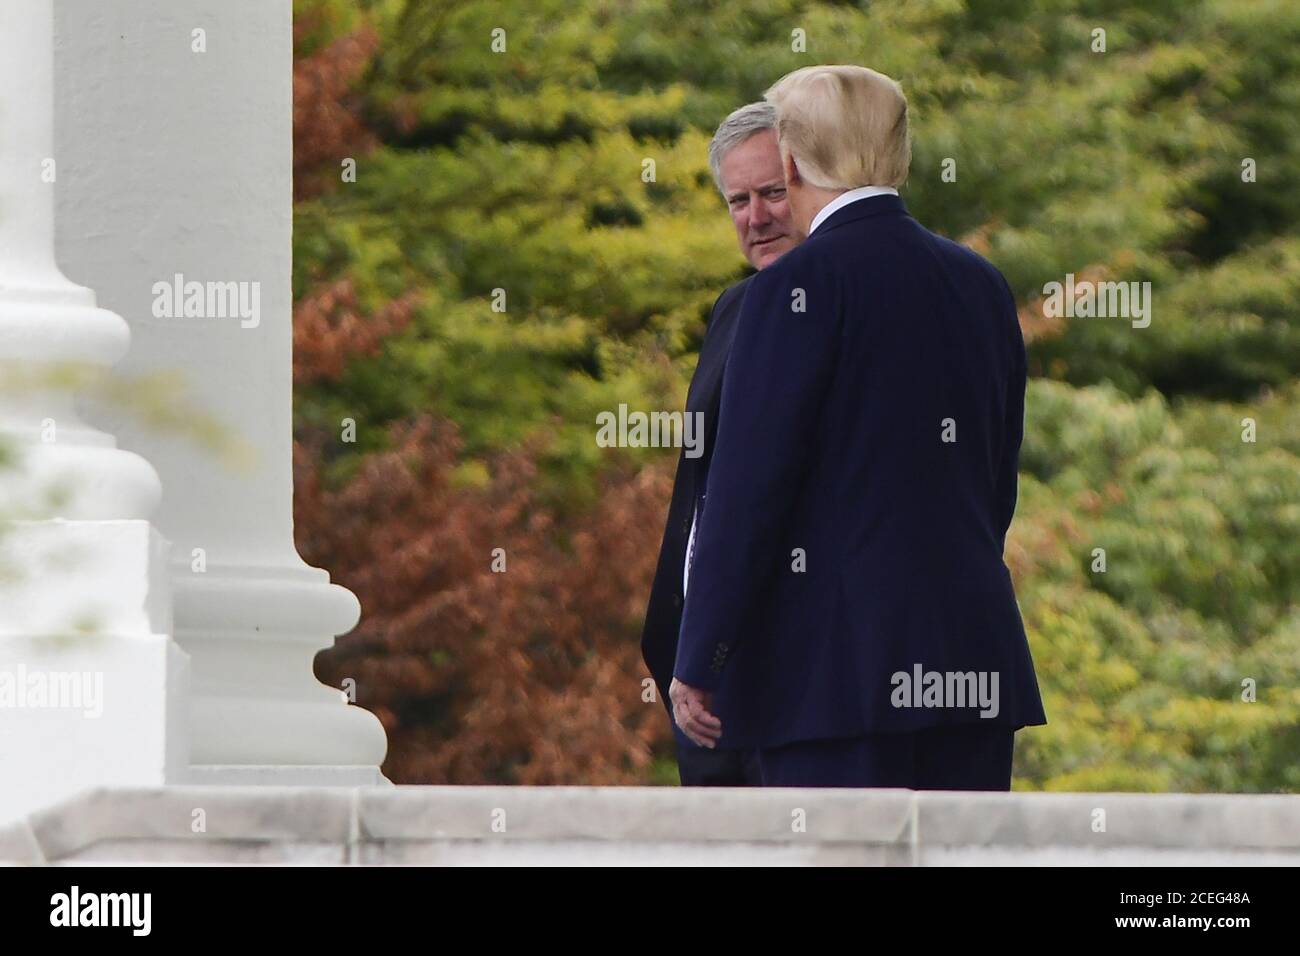 Washington, United States. 01st Sep, 2020. US President Donald Trump is joined by White House Chief of Staff Mark Meadows as he departs the White House to meet with law enforcement officials in Kenosha in Washington, DC on Tuesday, September 1, 2020. Photo by Rod Lamkey/UPI Credit: UPI/Alamy Live News Stock Photo